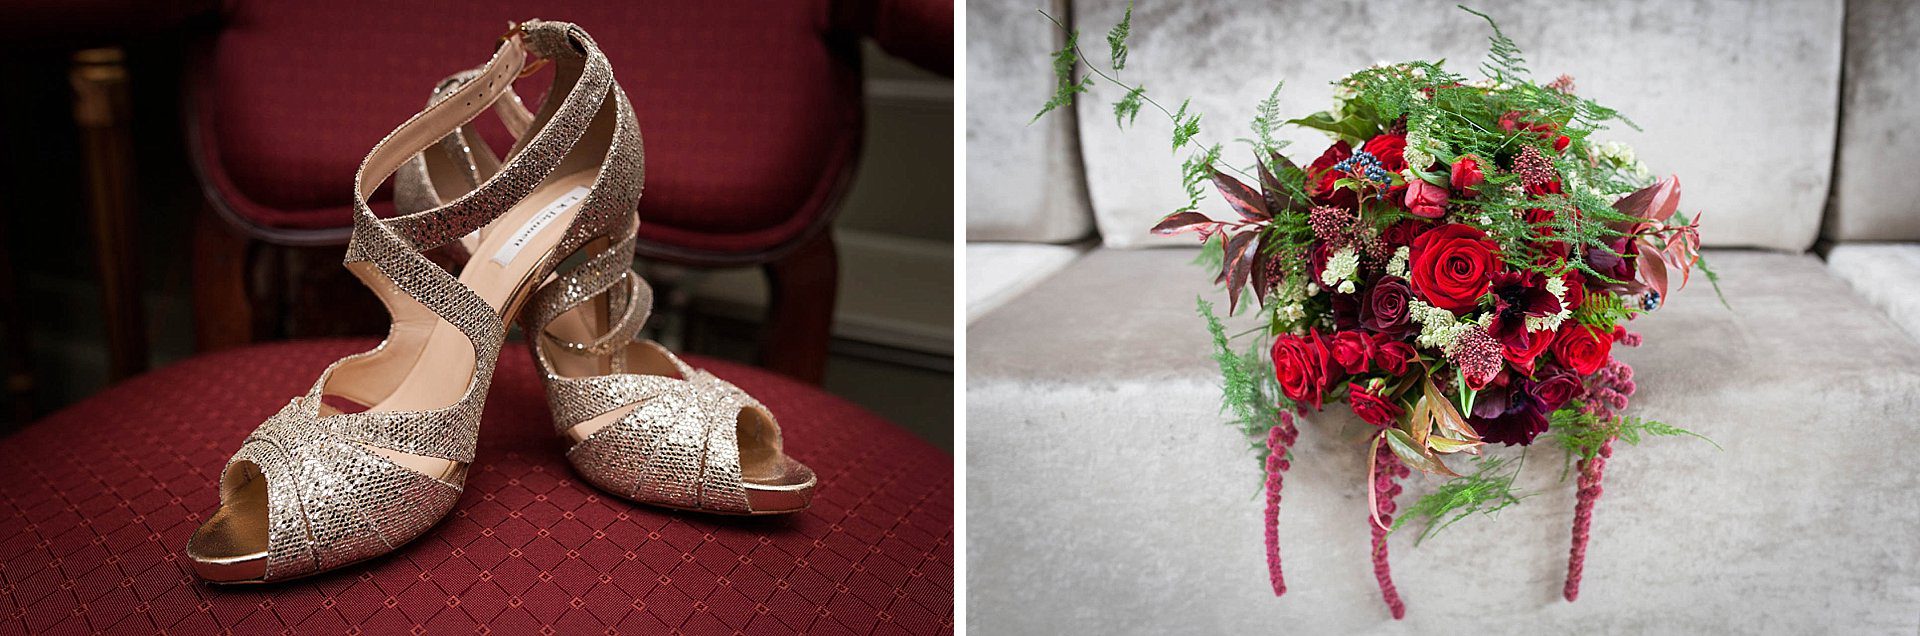 Cotswold wedding shoes and flowers